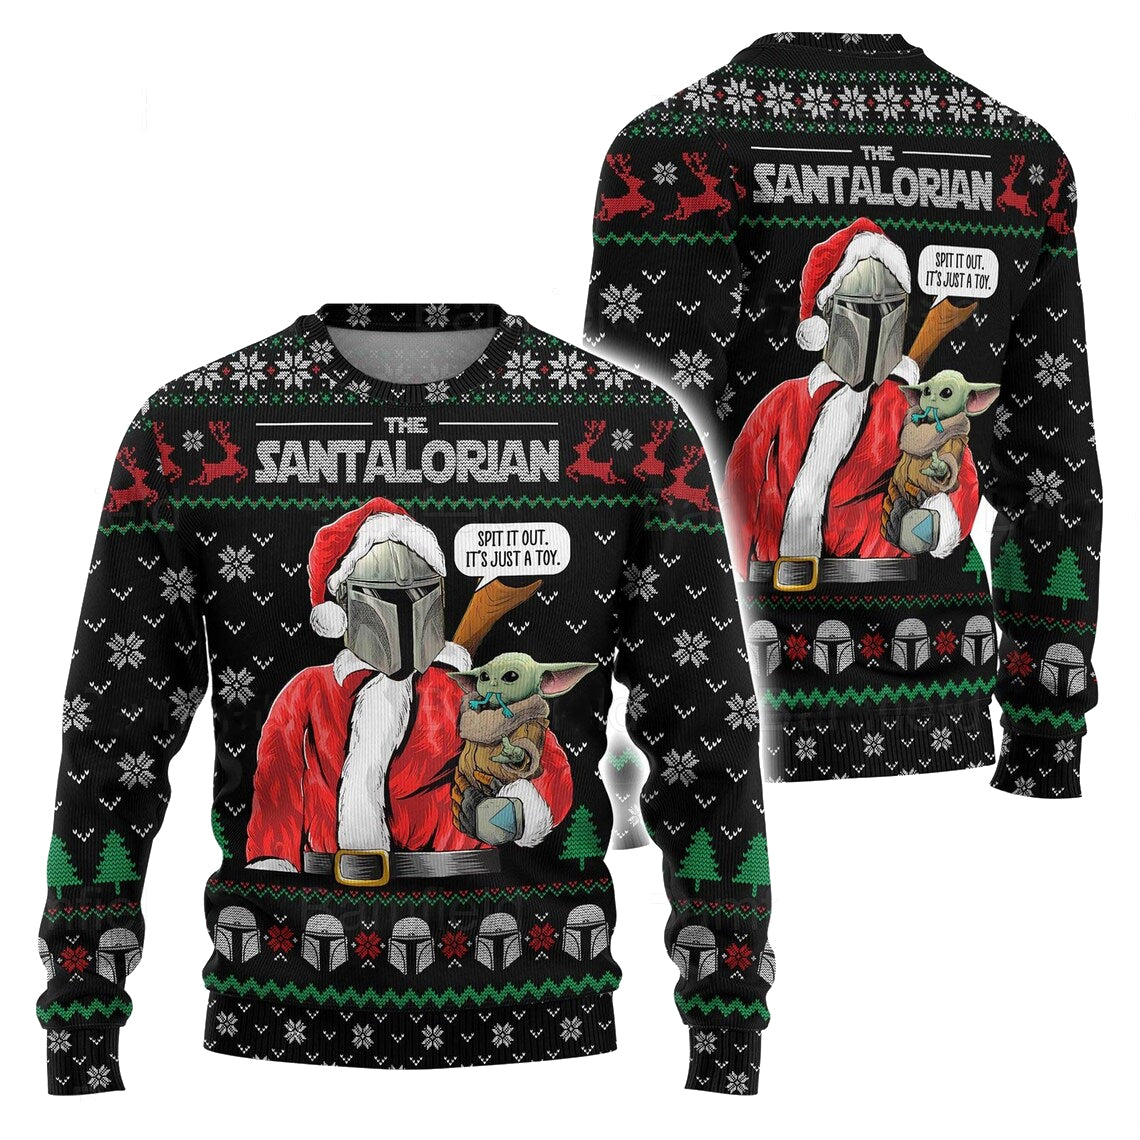 Christmas Star Wars Santalorian Spit It Out It's Just A Toy - Sweater - Ugly Christmas Sweater